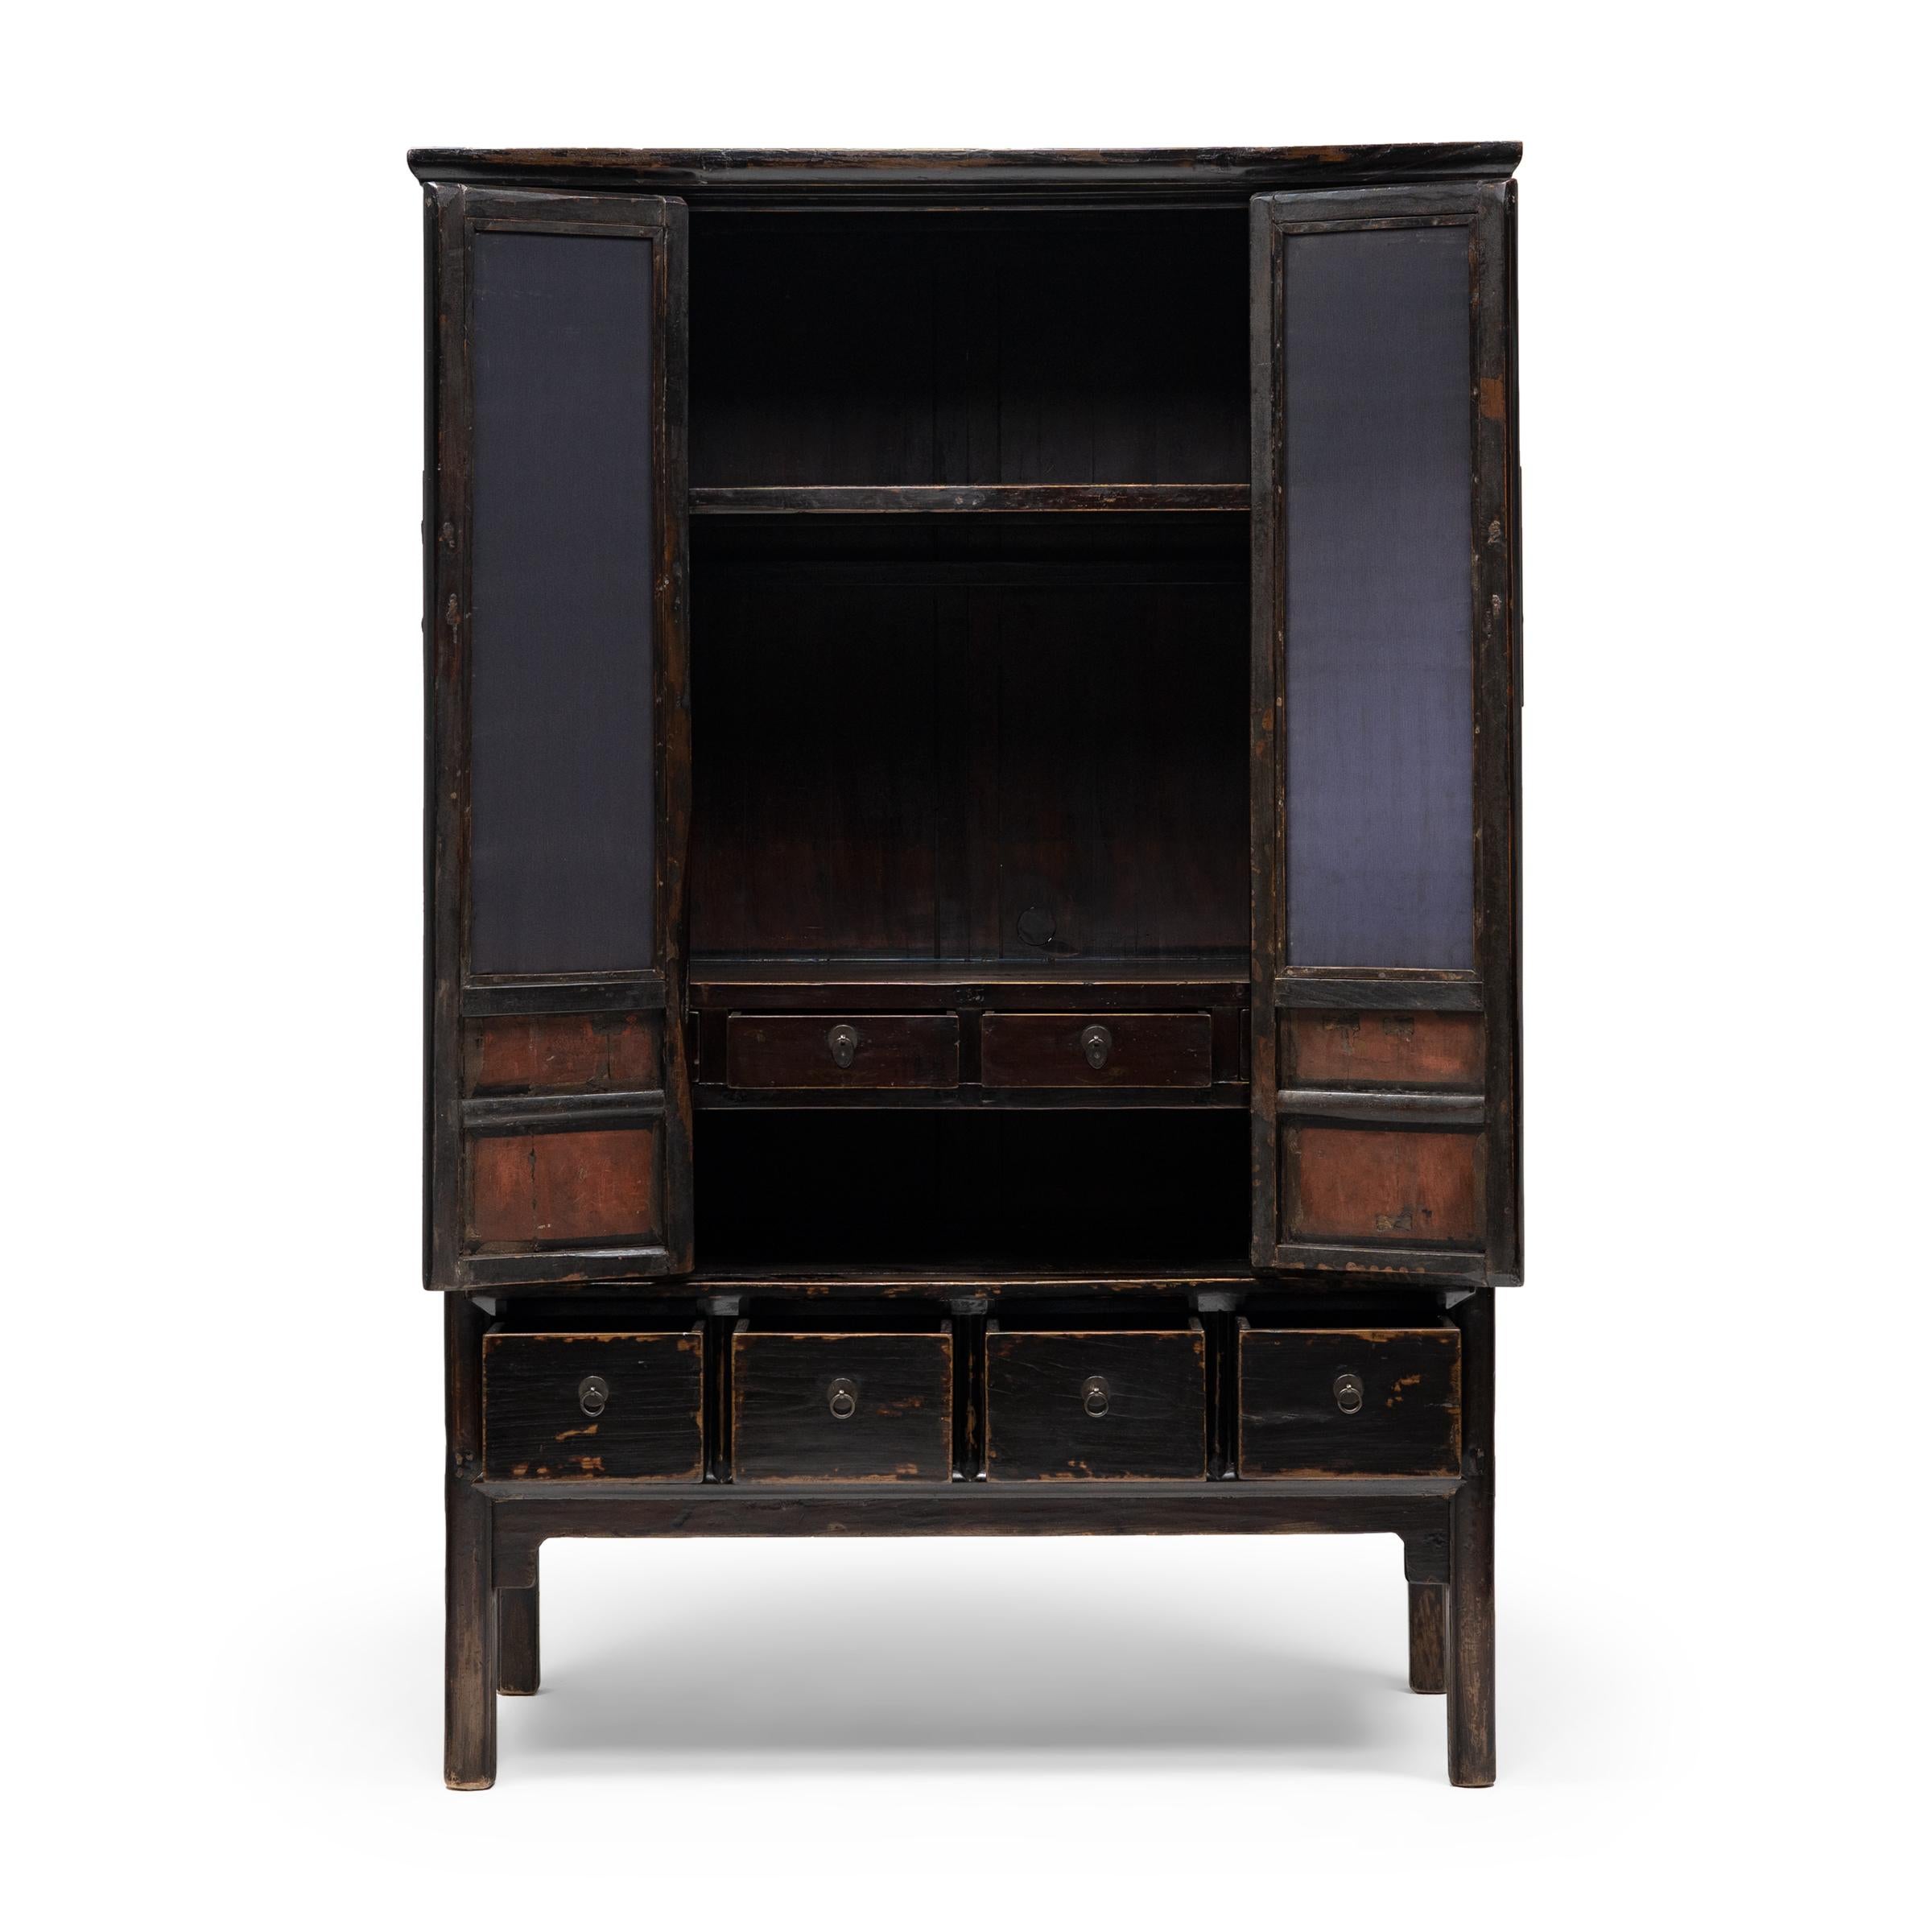 With clean lines and a darkly lacquered finish, this square corner cabinet celebrates the restraint of classic Chinese furniture forms. Dated to the mid-19th century, the tall cabinet is crafted of elmwood with traditional mortise-and-tenon joinery.